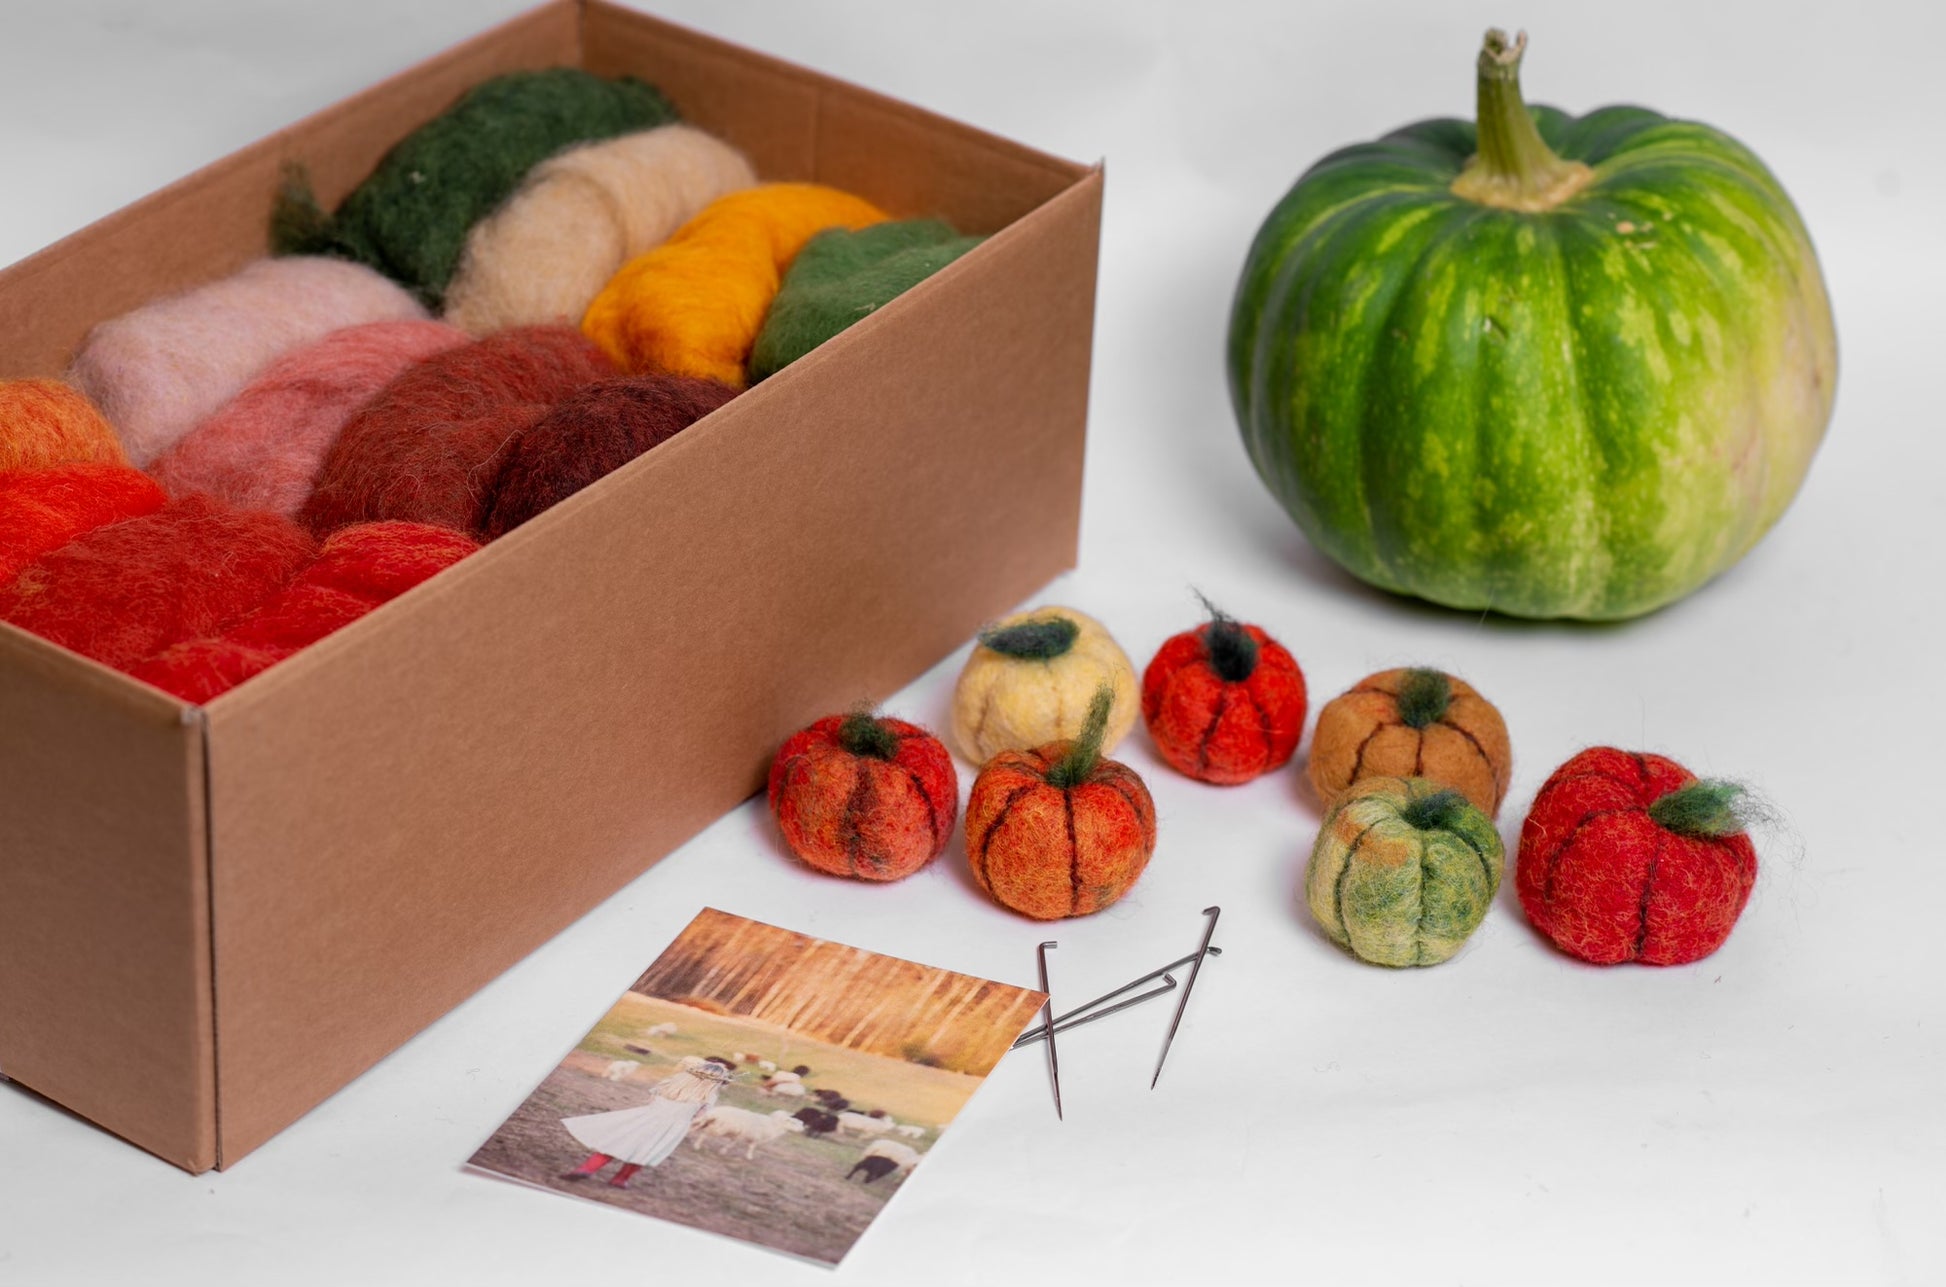 Craft Kit for Adults Needle Felting Kit for Beginners DIY 